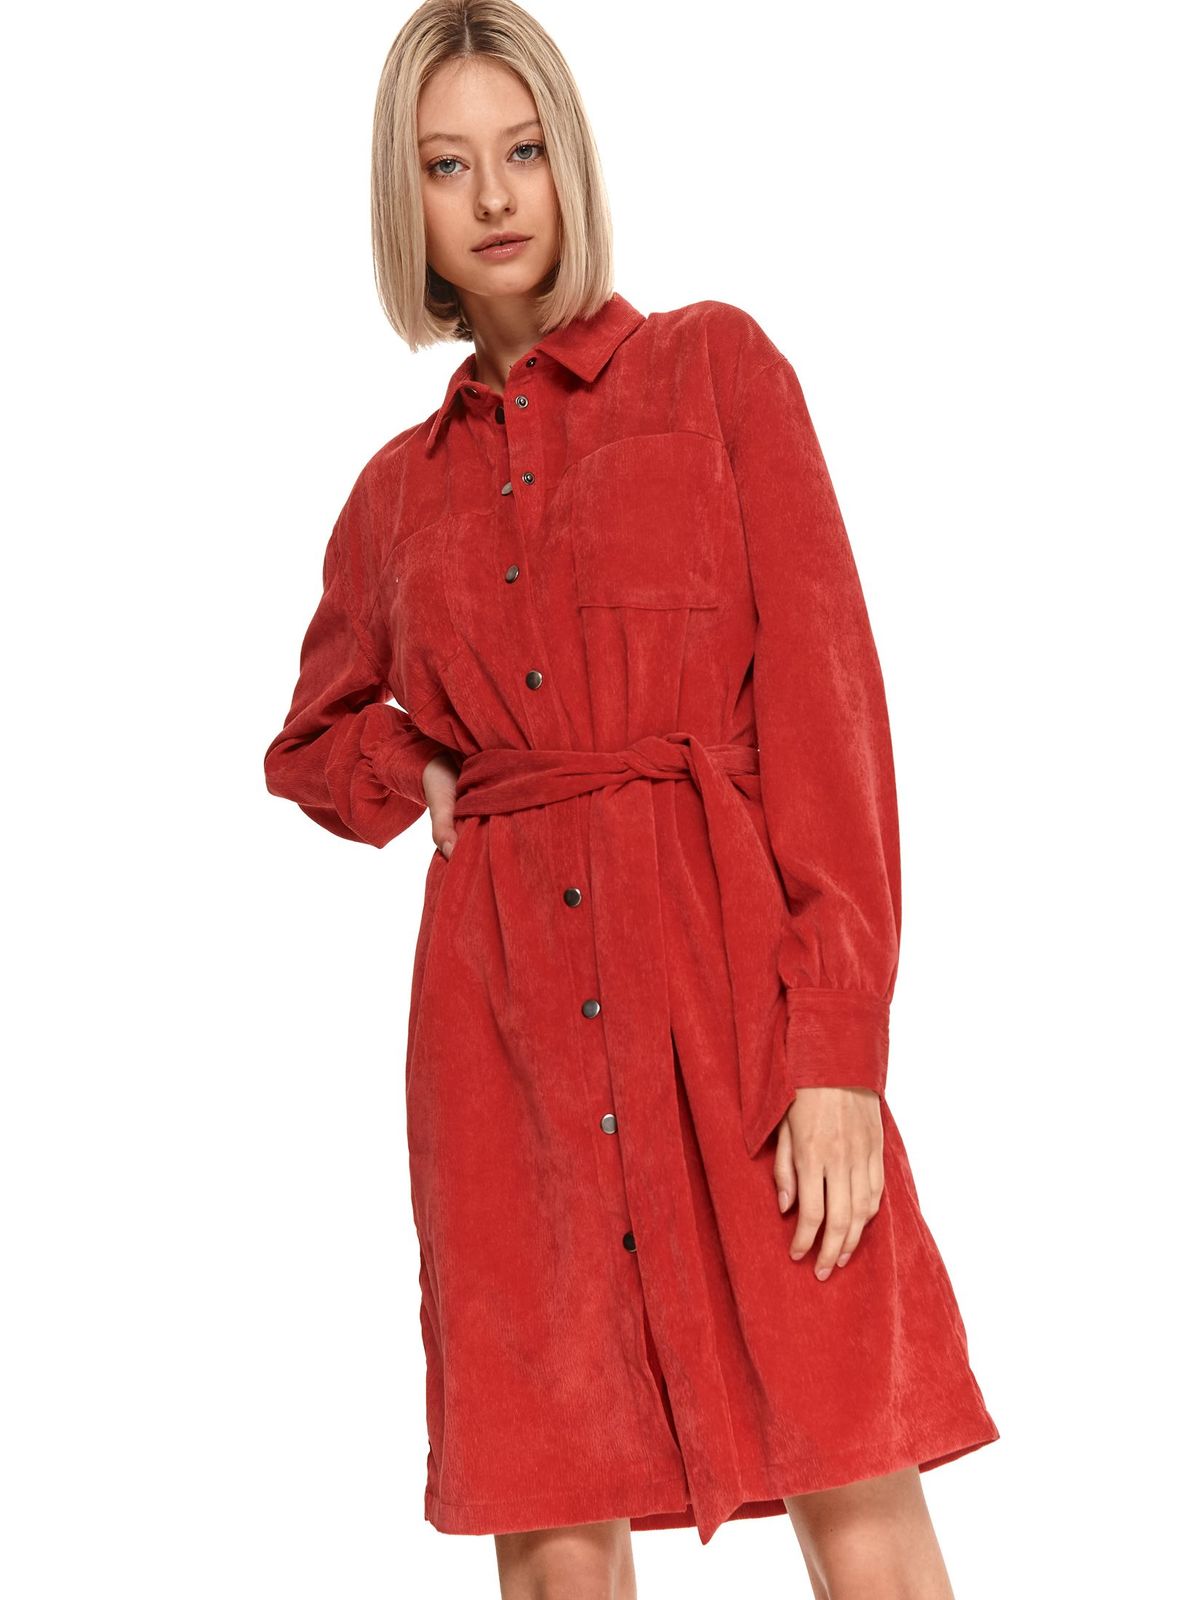 Red dress long sleeve loose fit soft fabric from velvet detachable cord